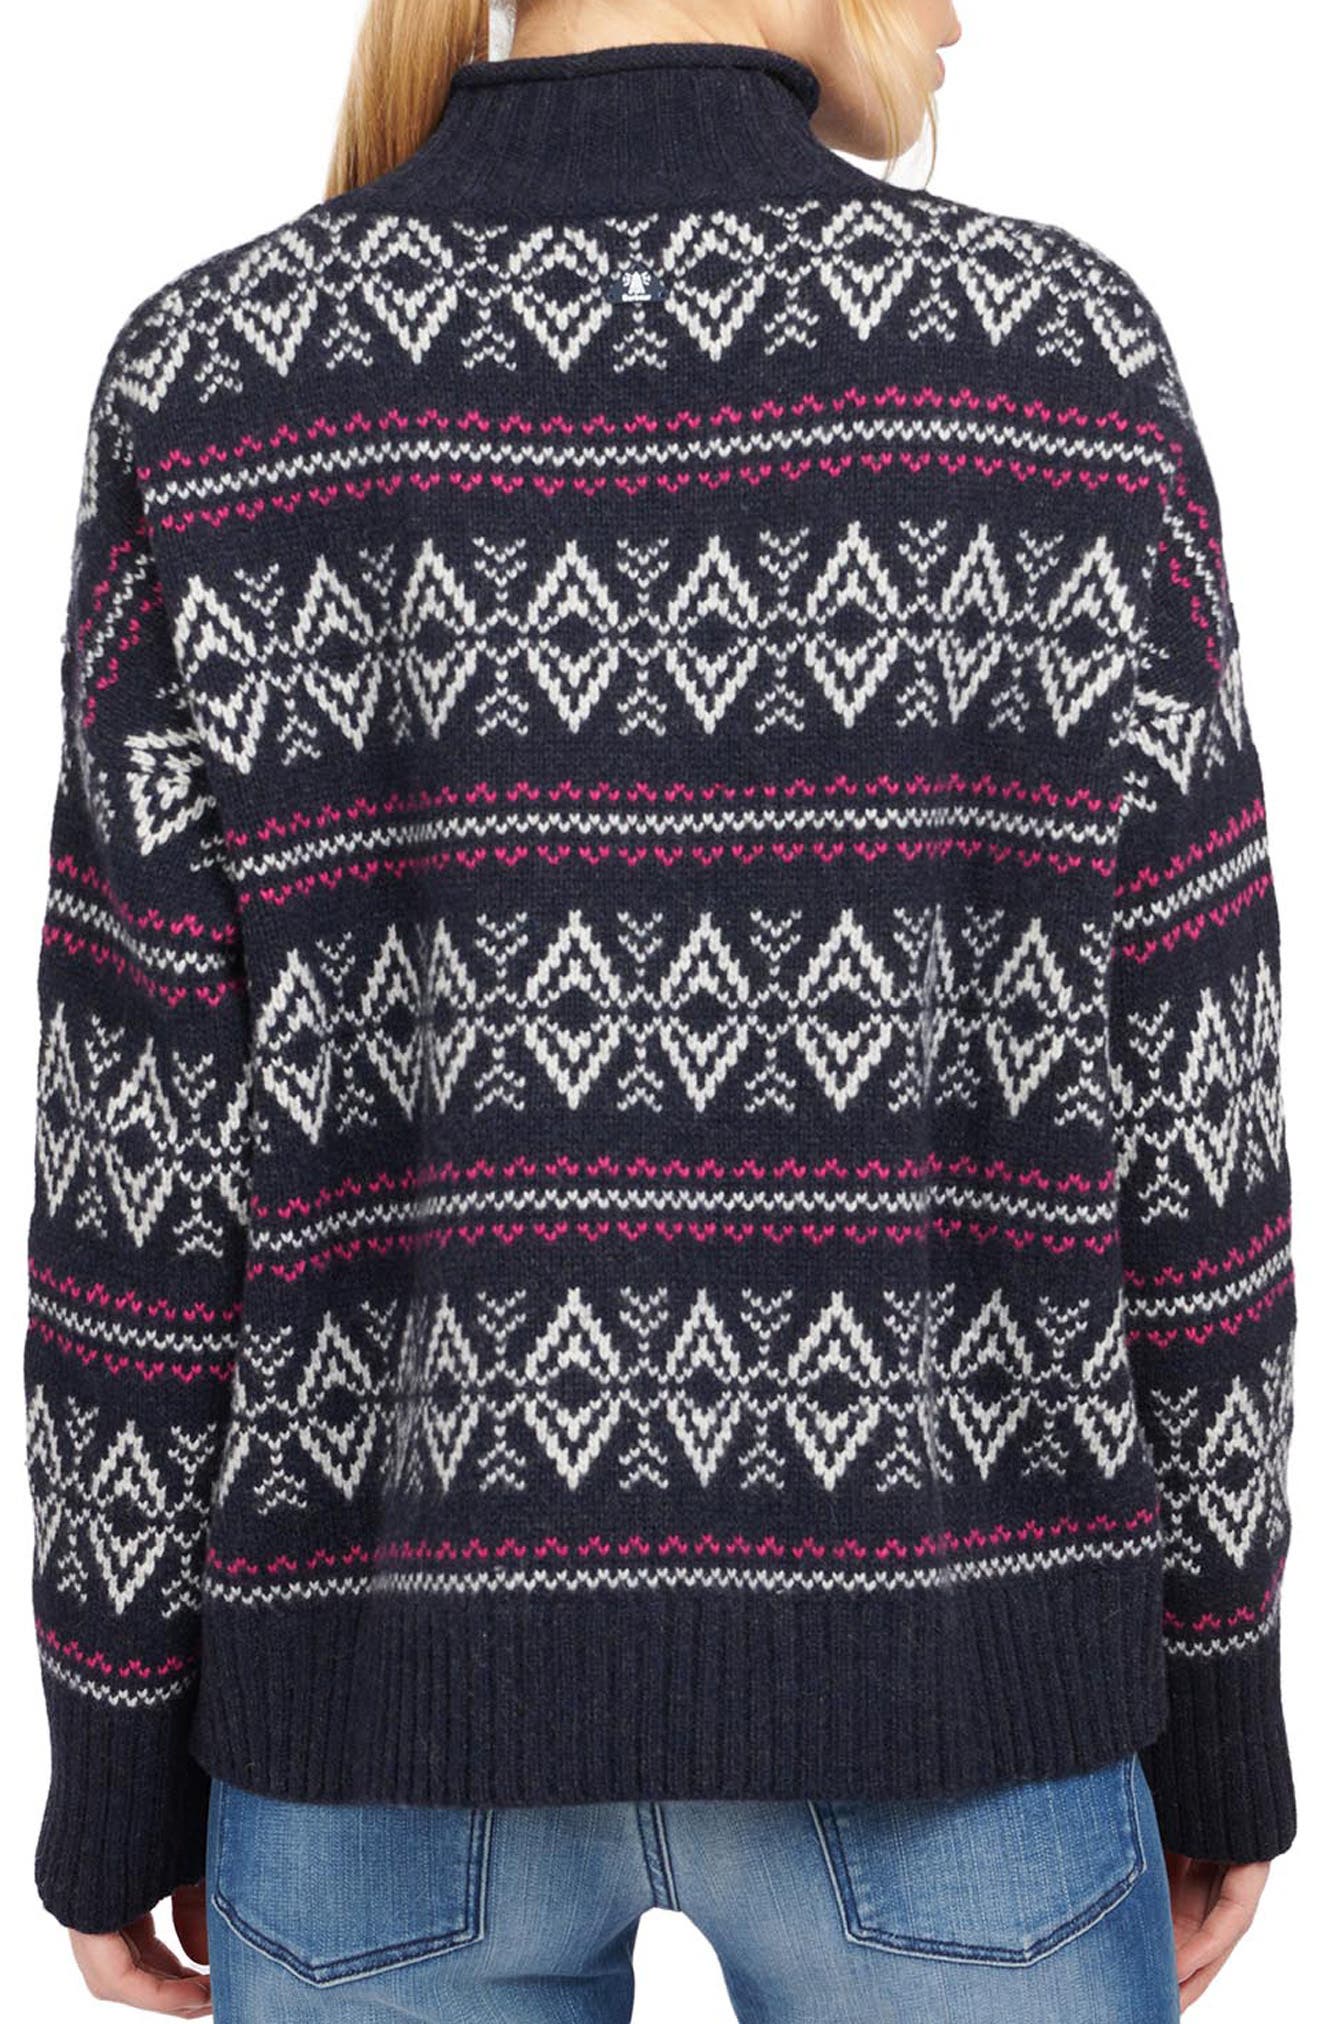 Barbour Lynemouth Knit Wool Blend Sweater in Multi at Nordstrom